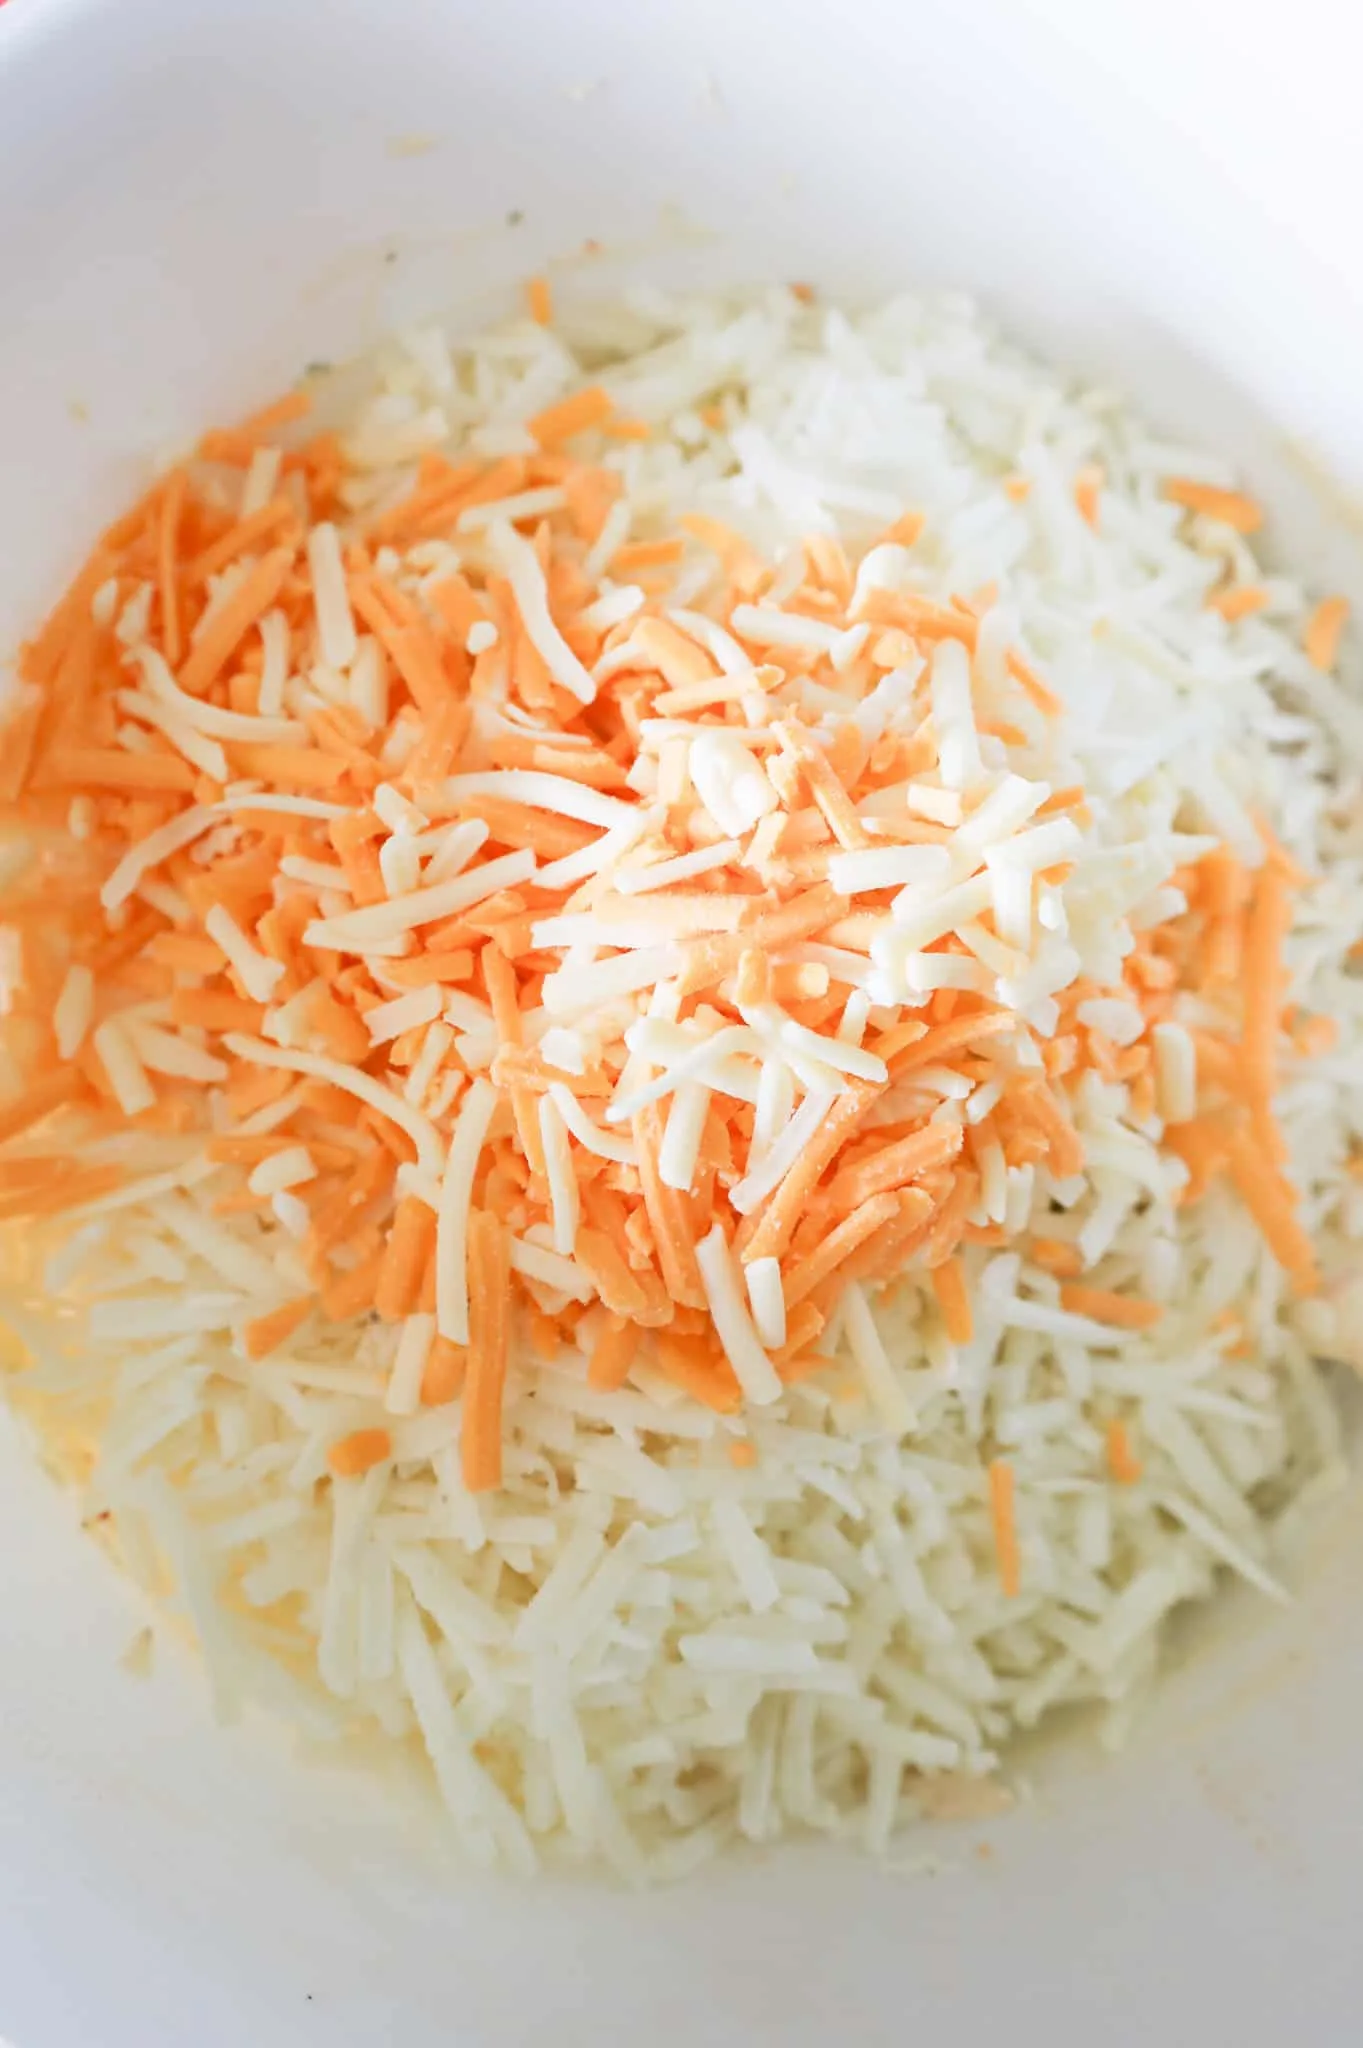 shredded cheddar cheese on top of shredded hashbrown potatoes in a mixing bowl